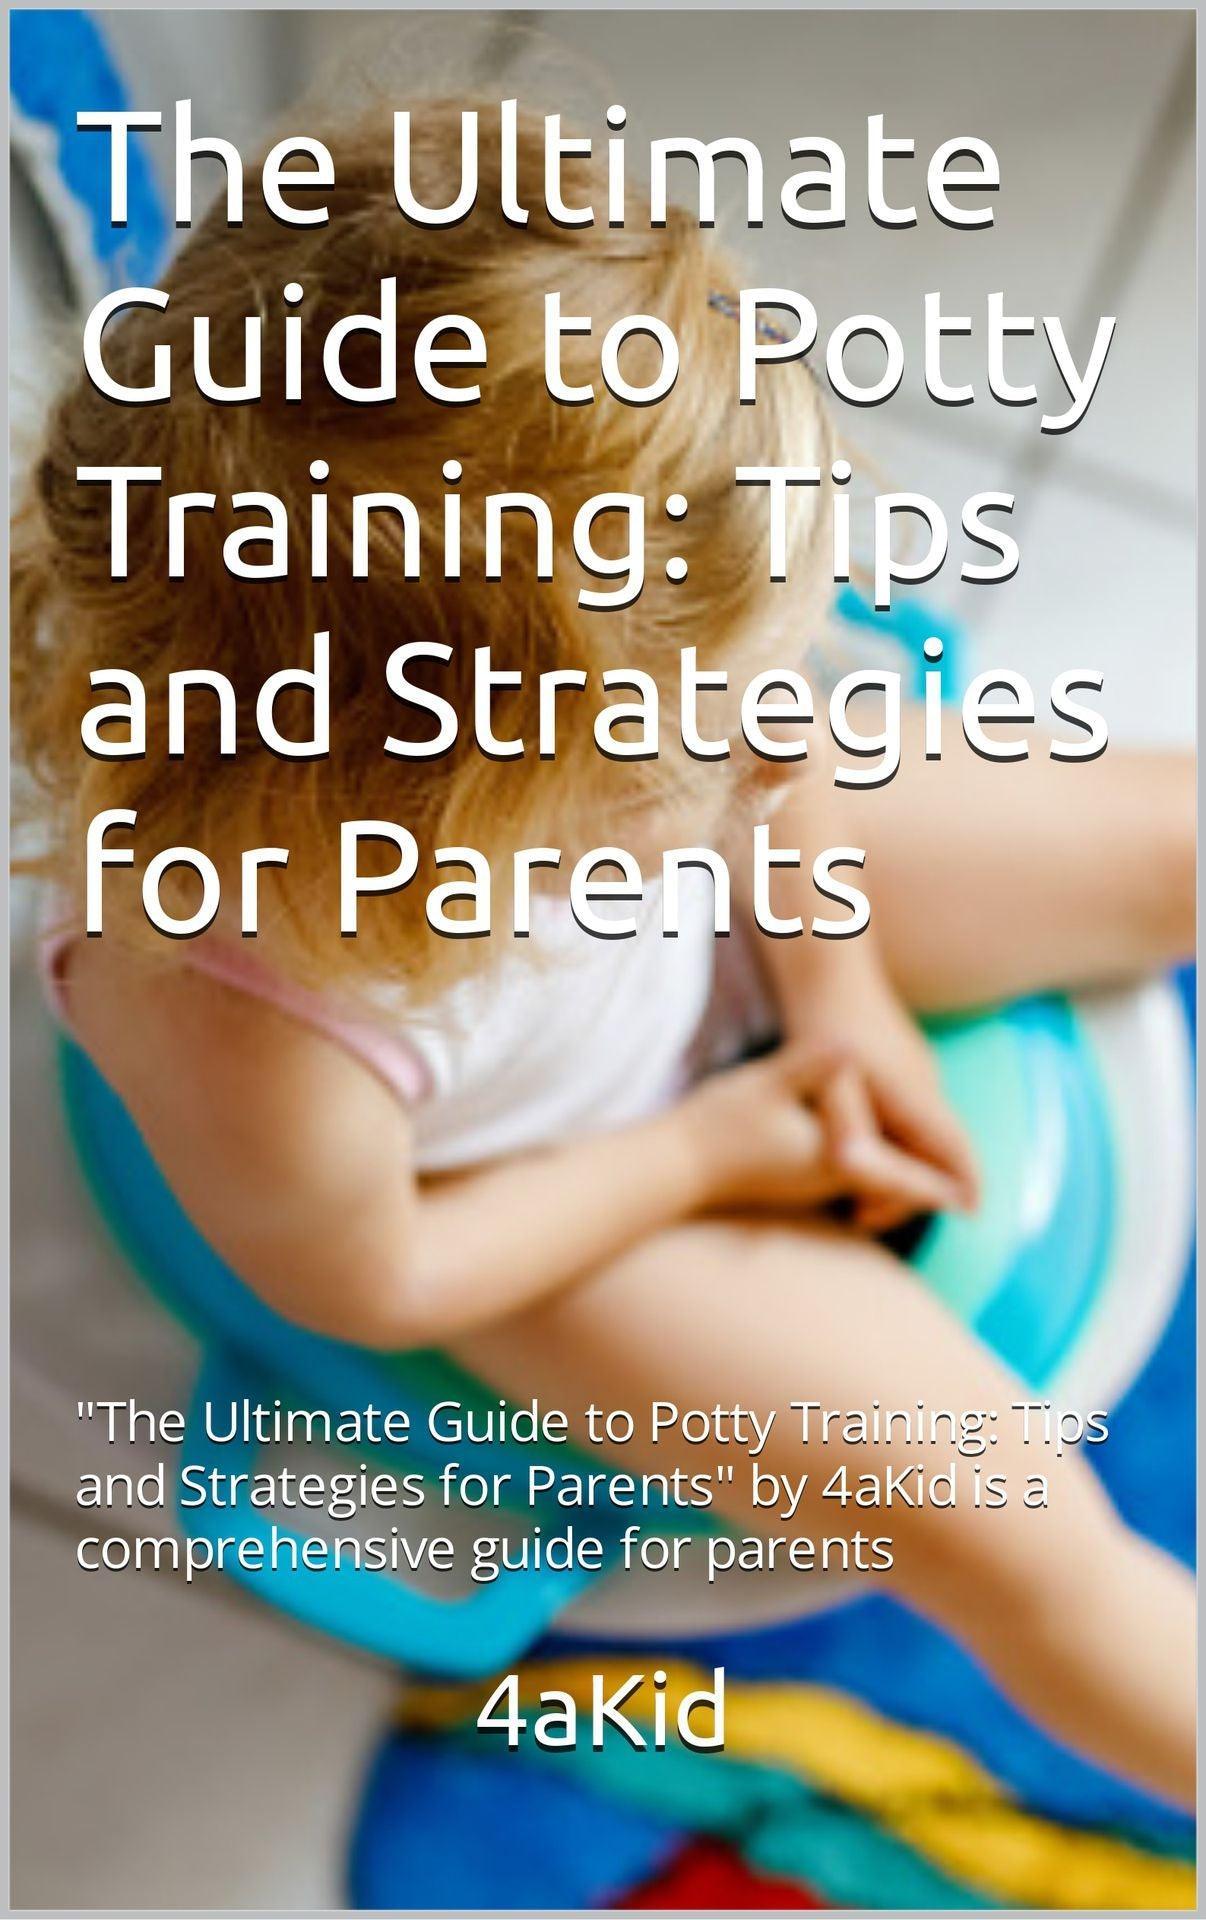 The Ultimate Guide to Potty Training: Tips and Strategies for Parents Digital E-Book - 4aKid